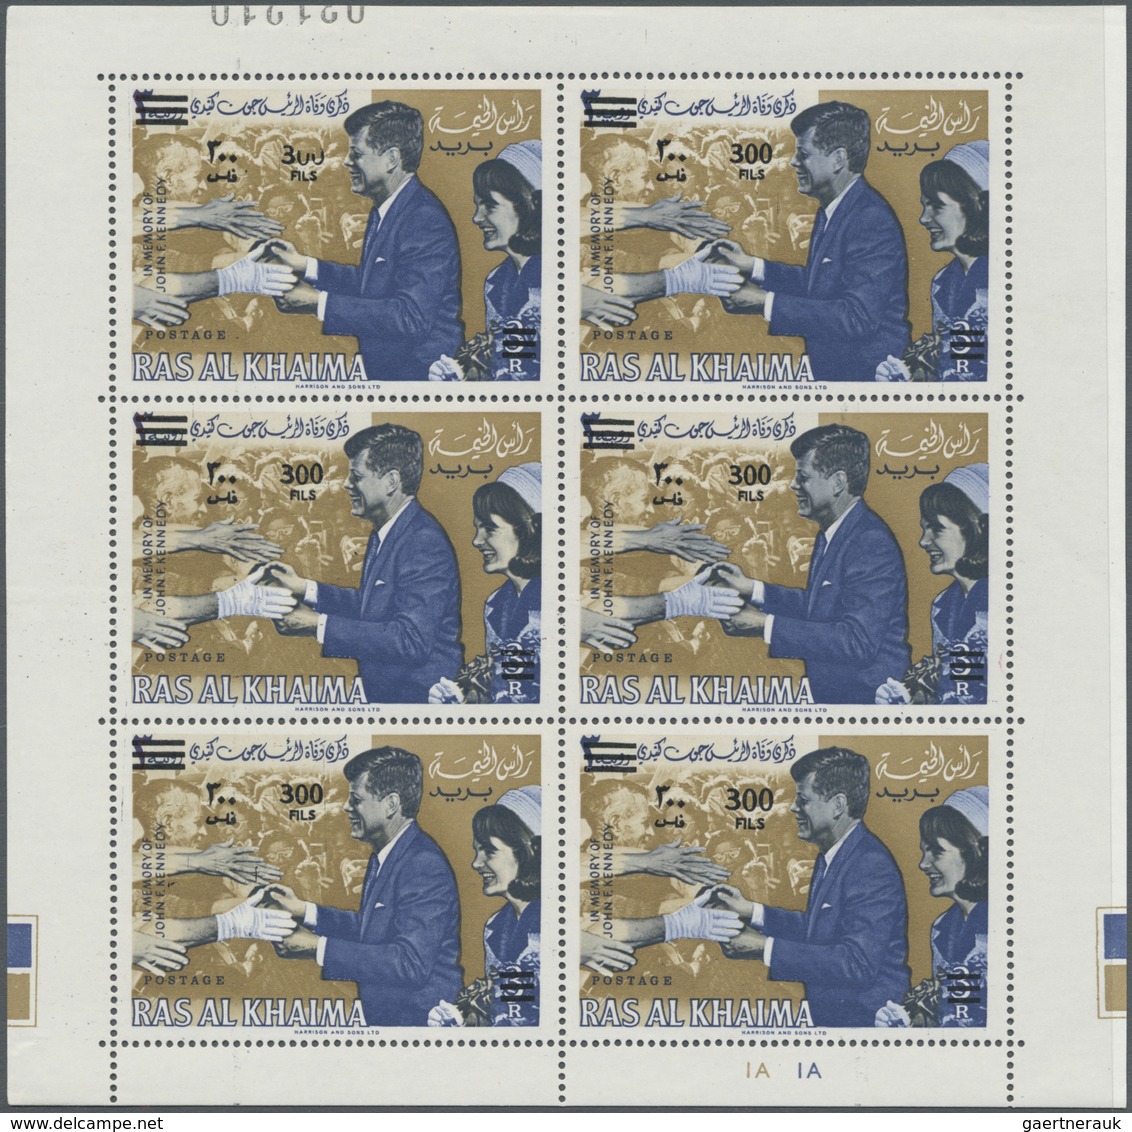 ** Ras al Khaima: 1965/1966, J.F.Kennedy, both issues (without/with overprint), each as mini sheets of